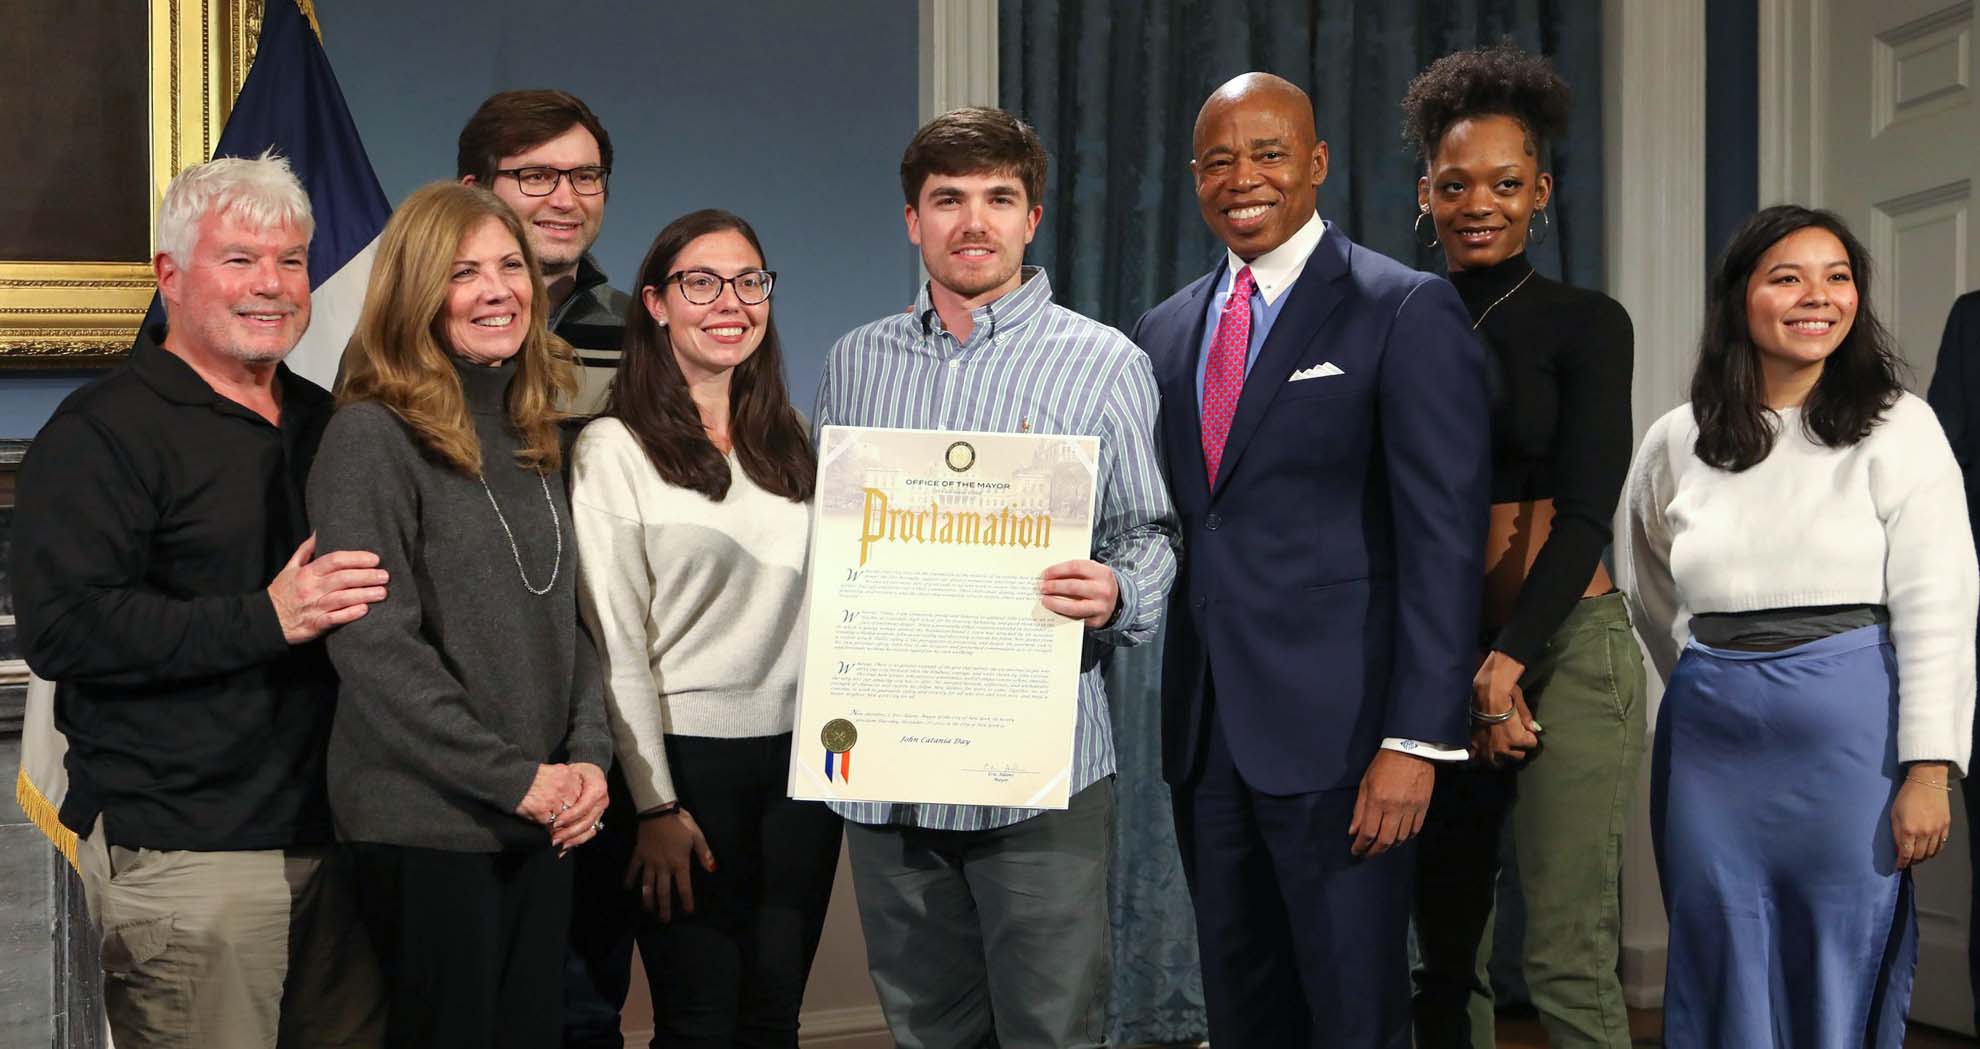 Scarsdale TA member John Catania was honored for his heroism by New York City Mayor Eric Adams. During the ceremony, Adams issued a special proclamation naming December 27 John Catania Day. Photo provided.